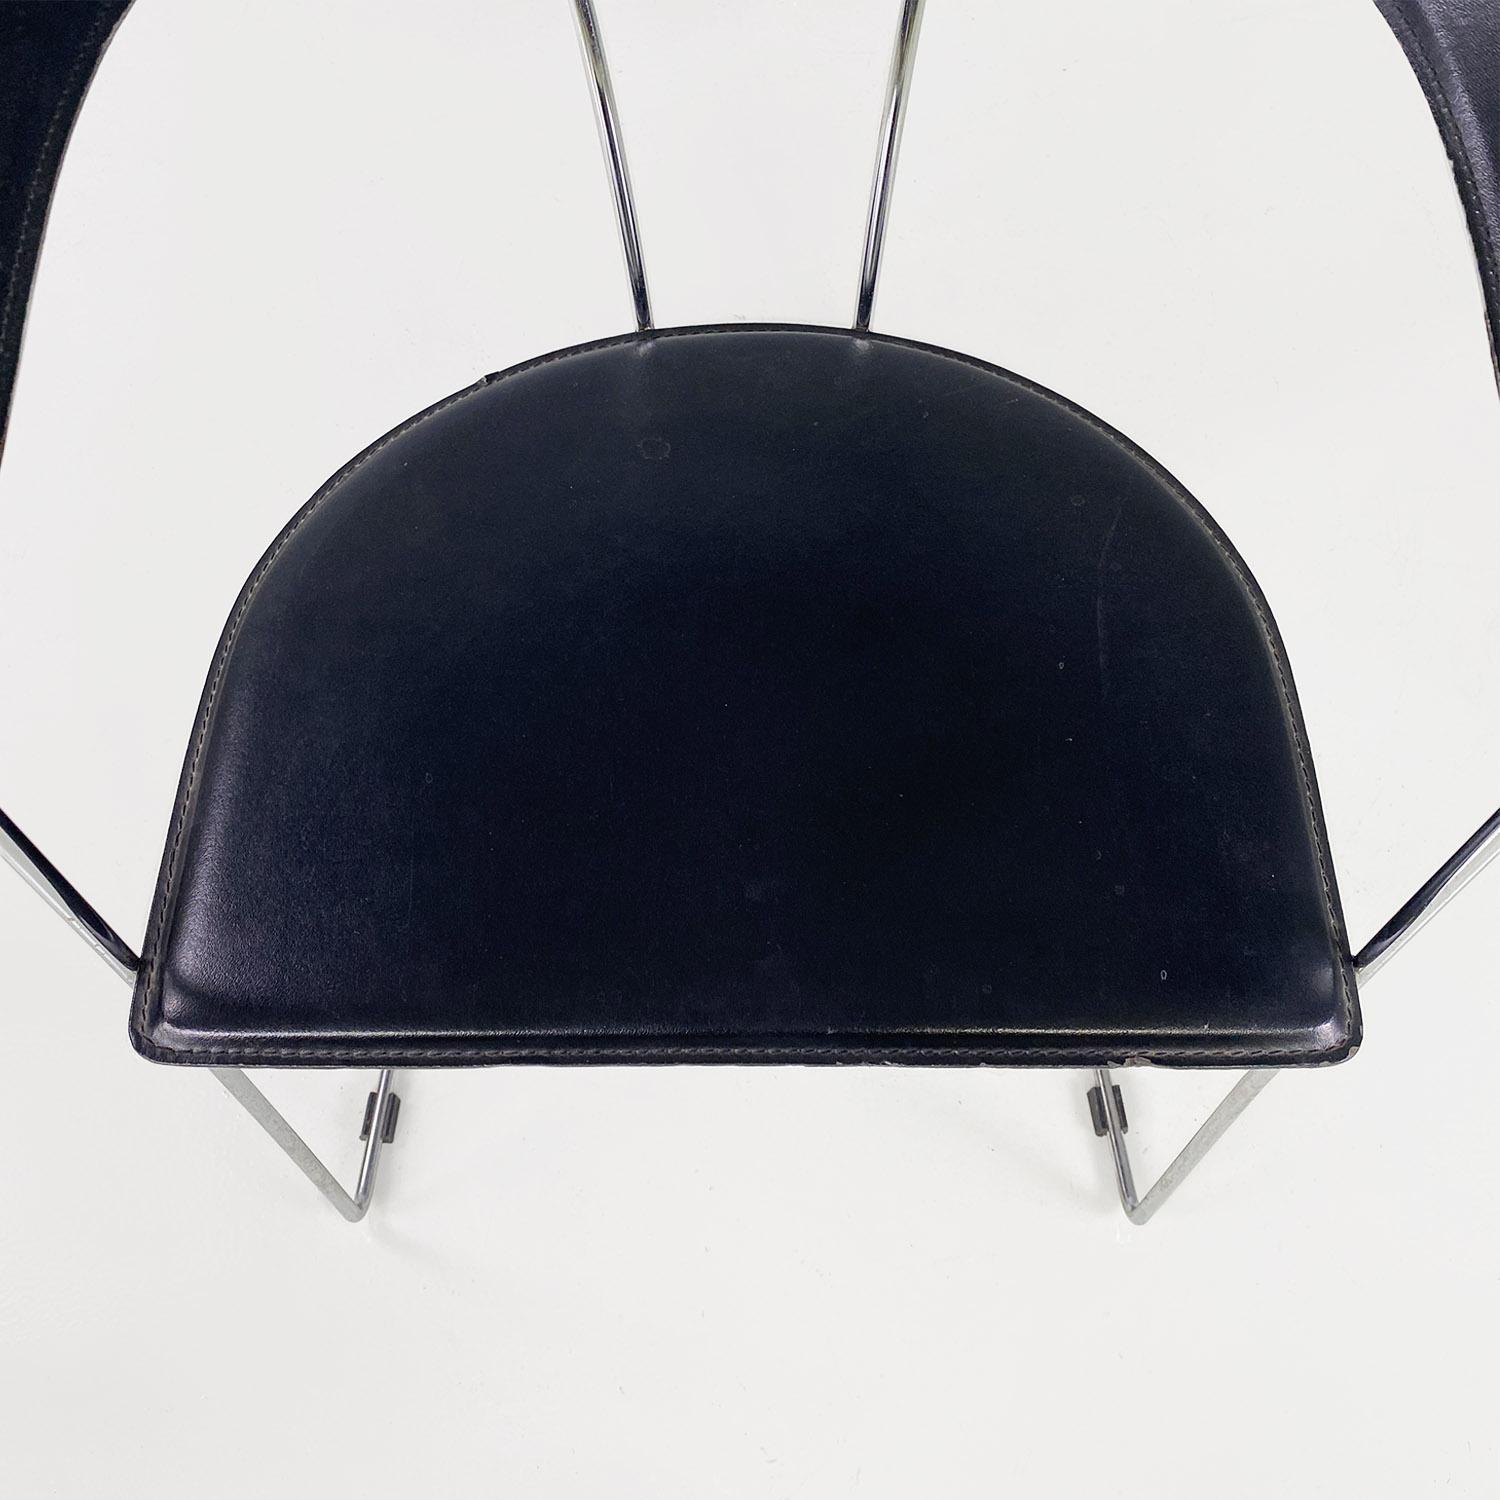 Late 20th Century Italian modern chromed metal and black leather curved shape chairs, 1980s For Sale